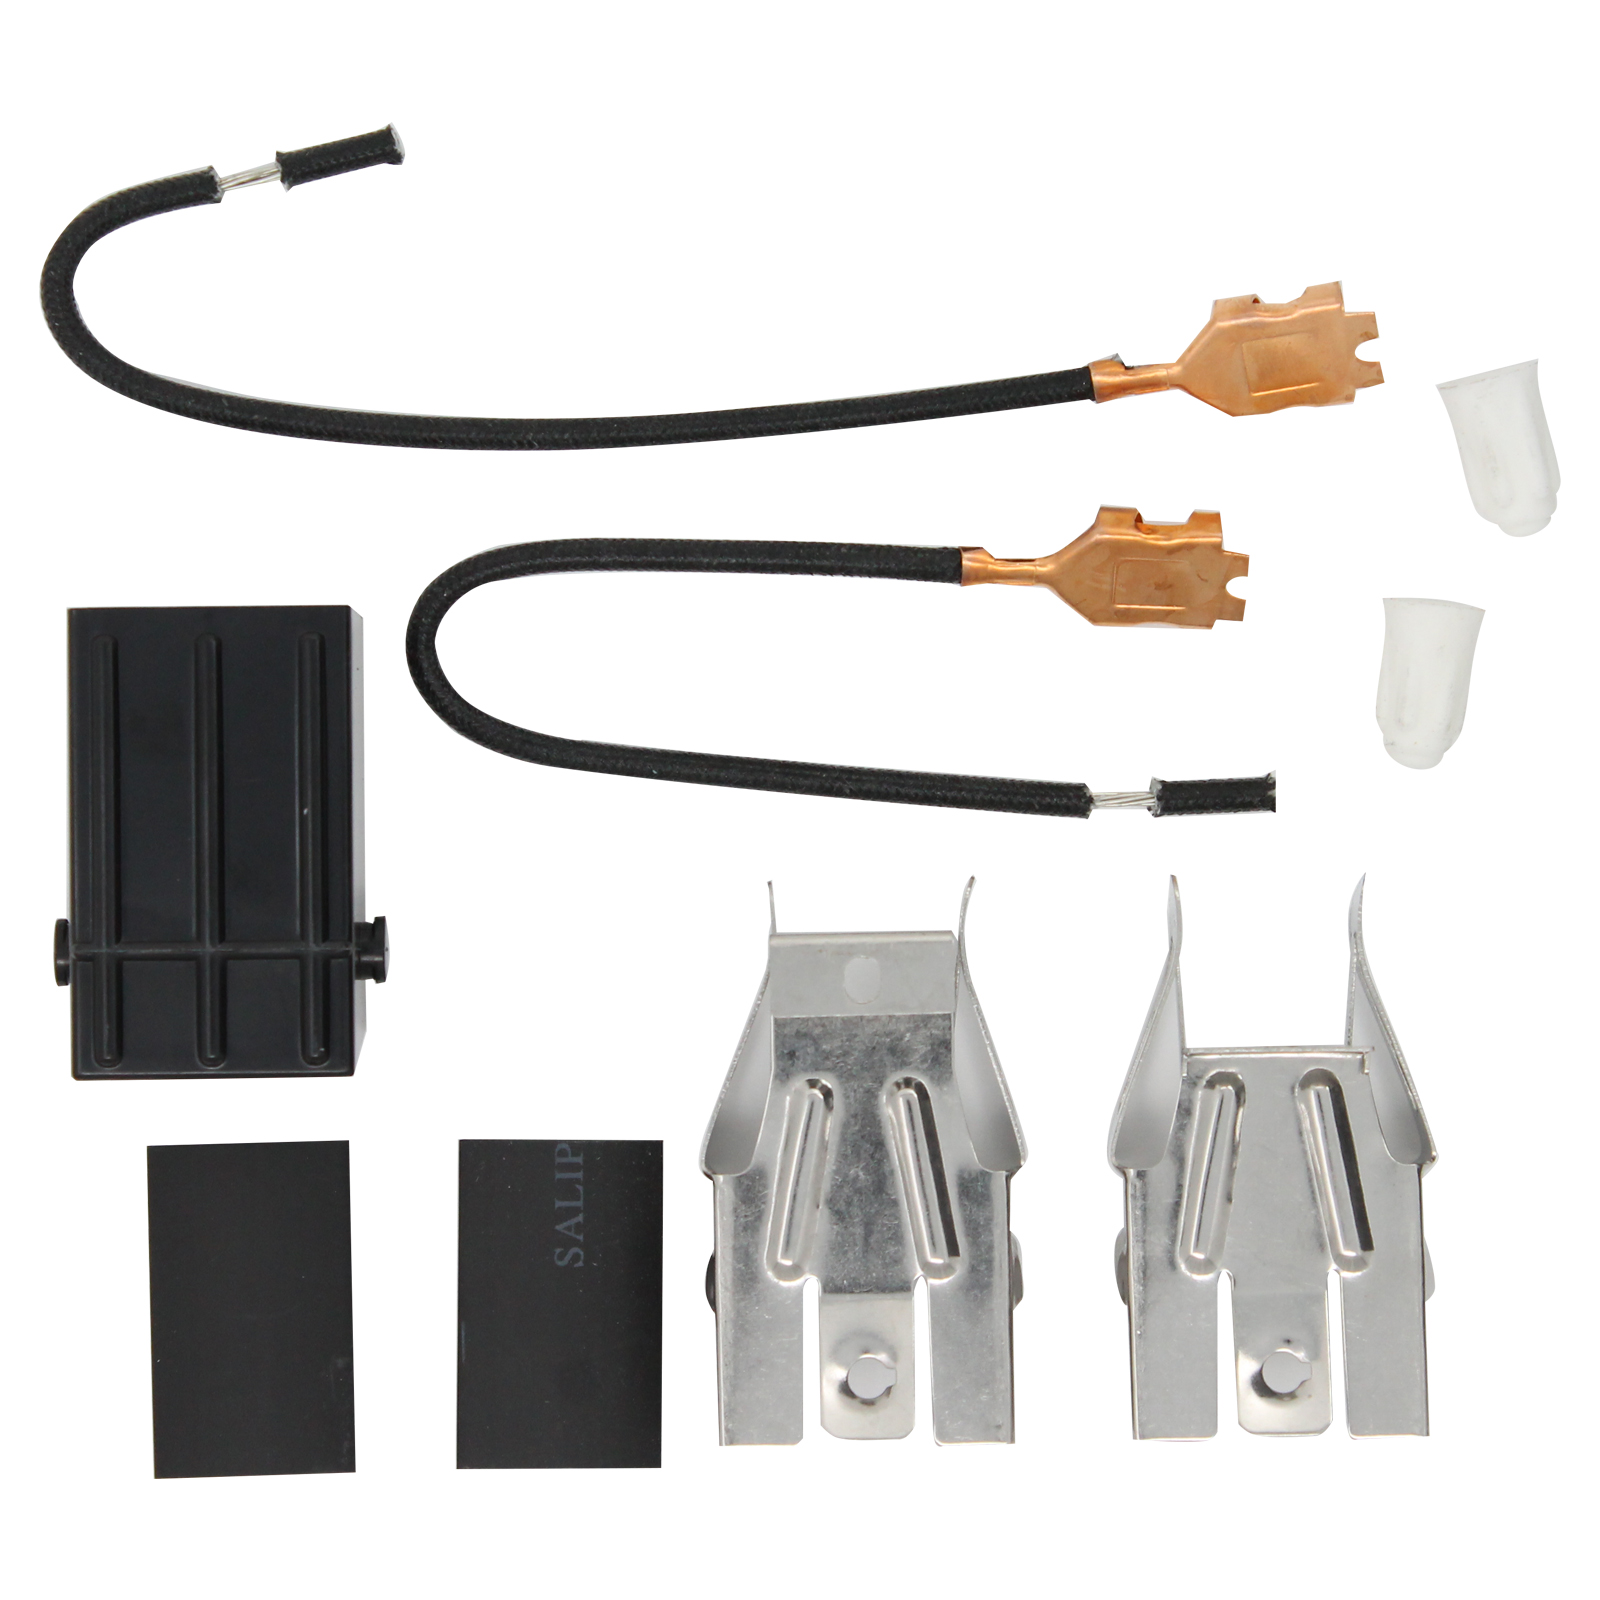 330031 Top Burner Receptacle Kit Replacement for Amana GBE22AA5PT (P1142484N L) Range/Cooktop/Oven - Compatible with 330031 Range Burner Receptacle Kit - UpStart Components Brand - image 2 of 4